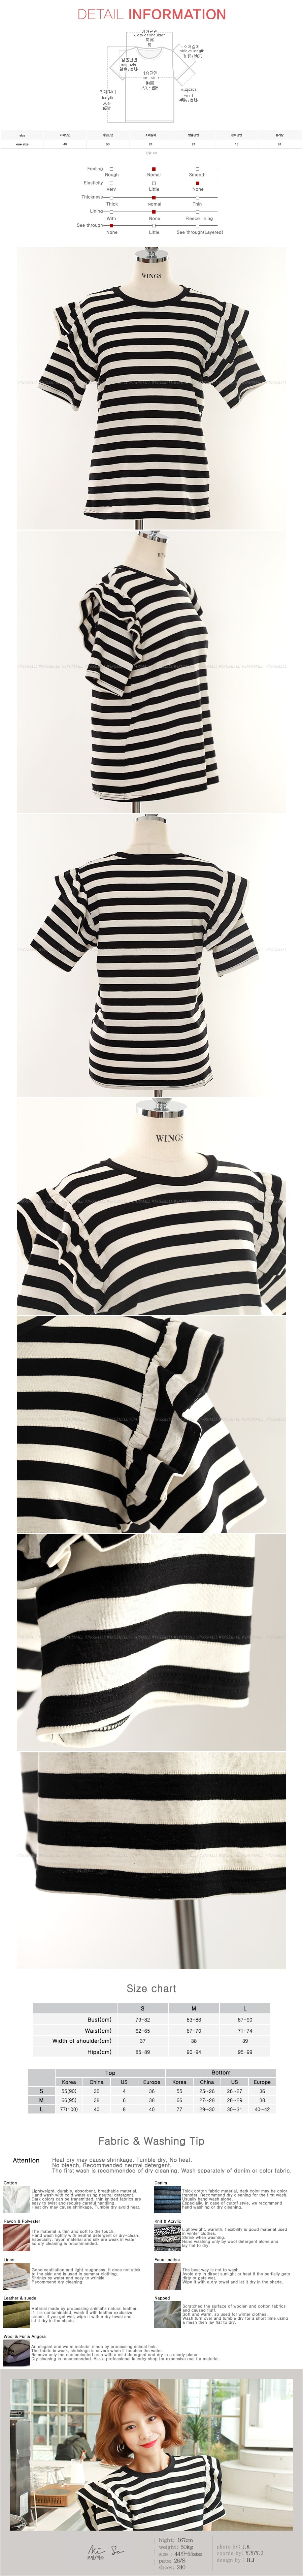 WINGS Ruffle Shoulder Striped Top #Black One Size(S-M)